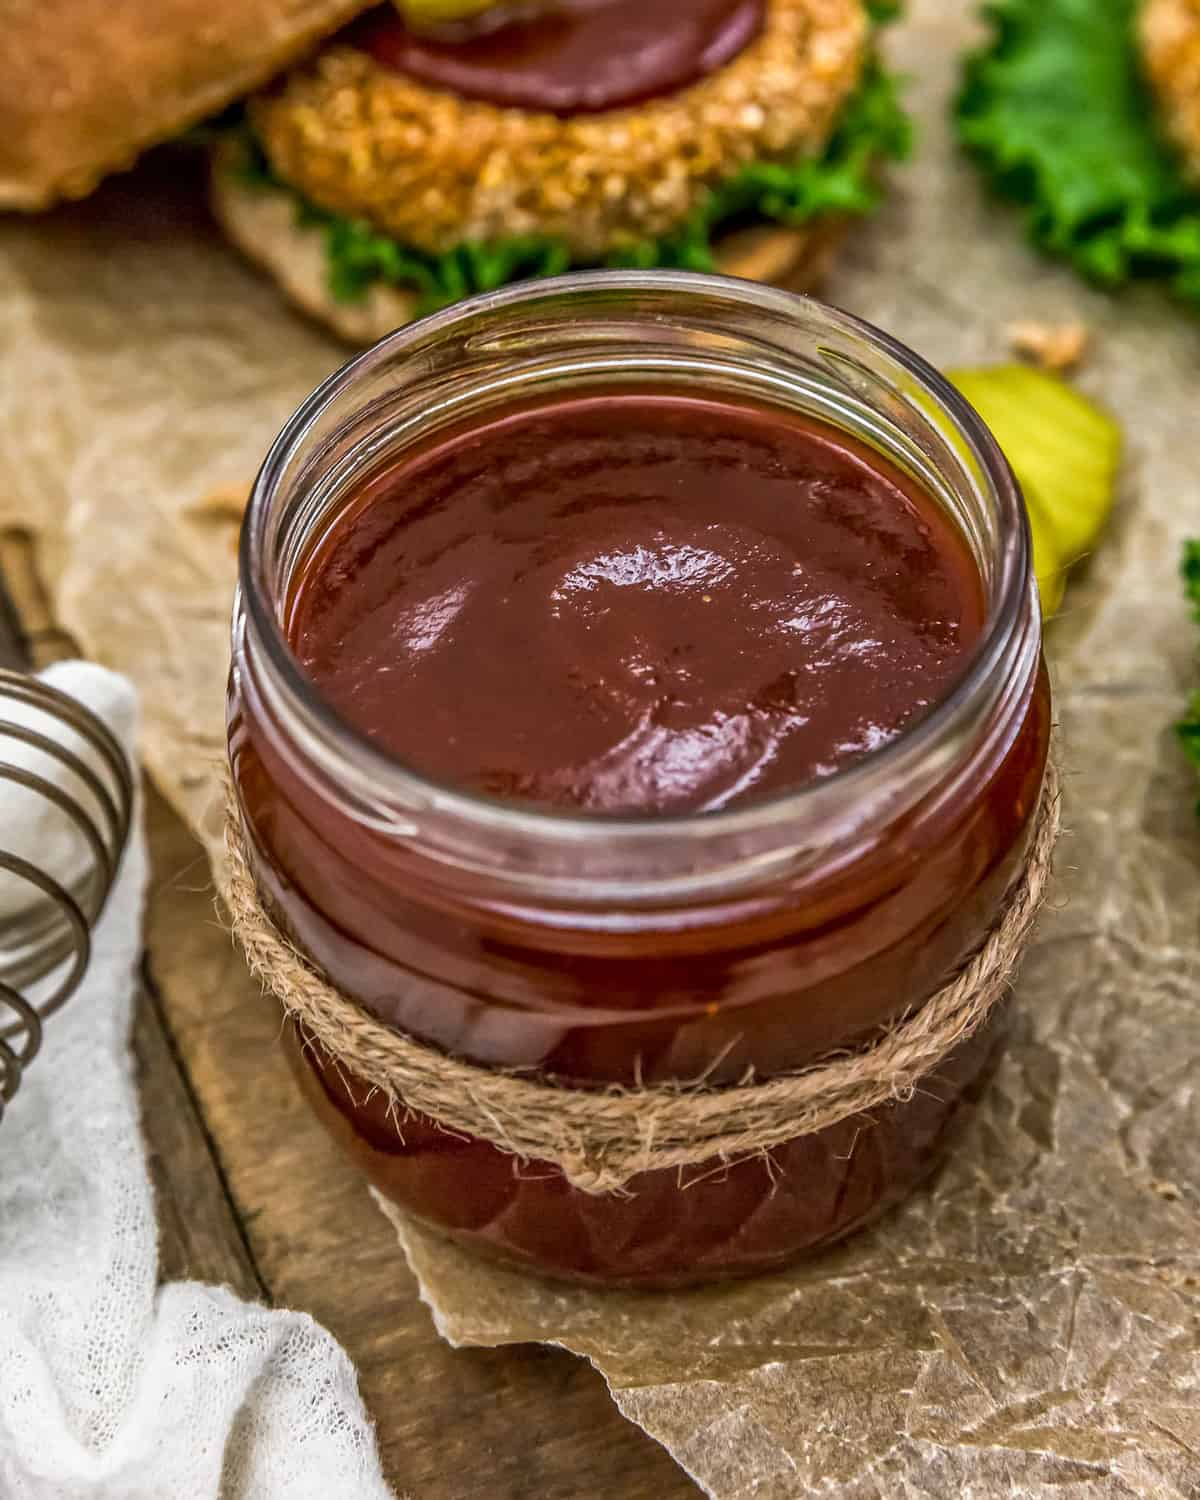 Sweet and Smoky BBQ Sauce with Vegan BBQ "Chicken" Patty